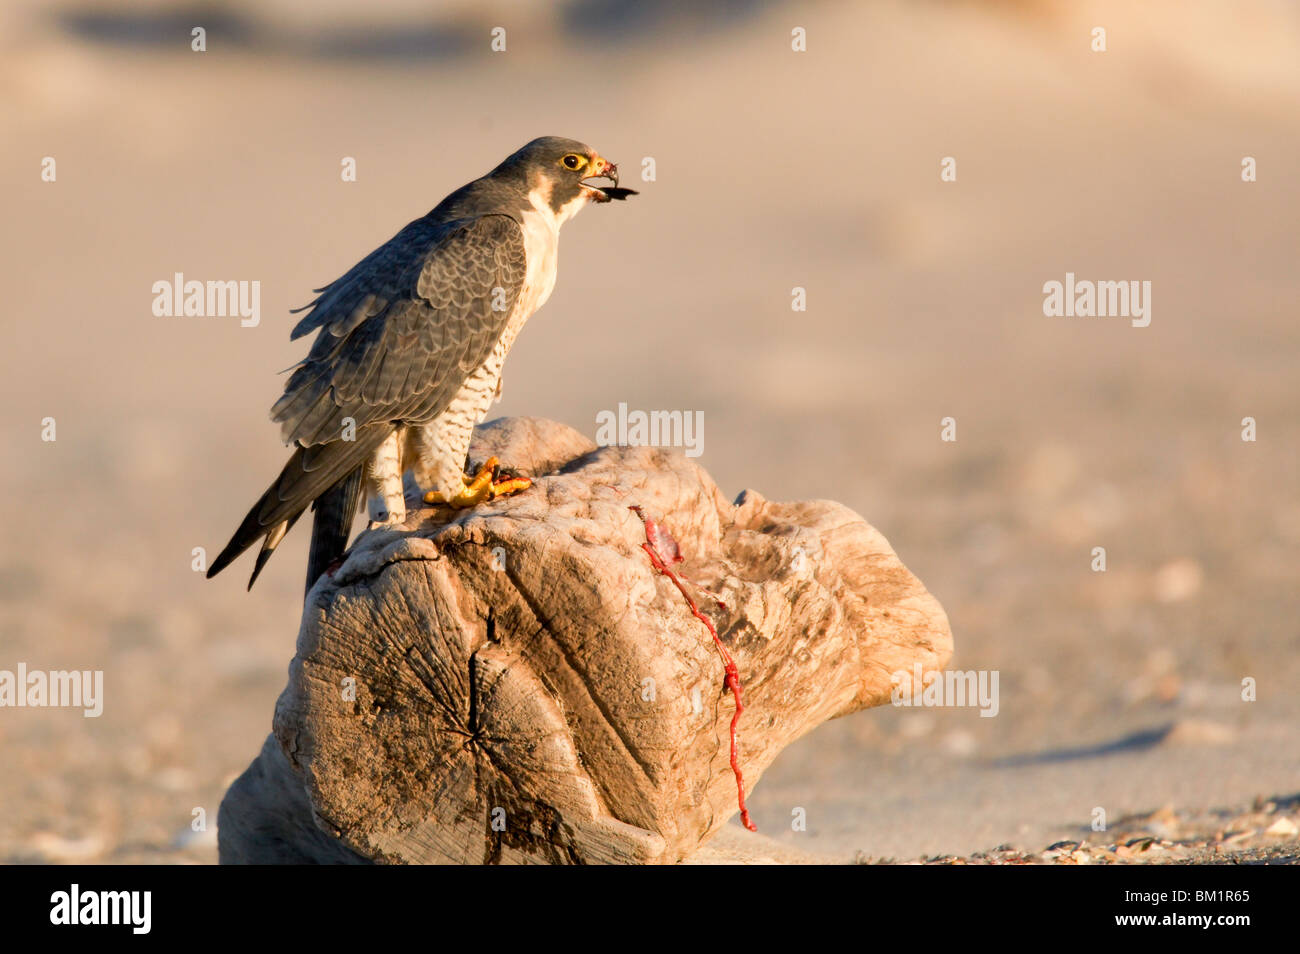 Adult Peregrine Falcon perched on a stump eating a Dovekie at dawn Stock Photo